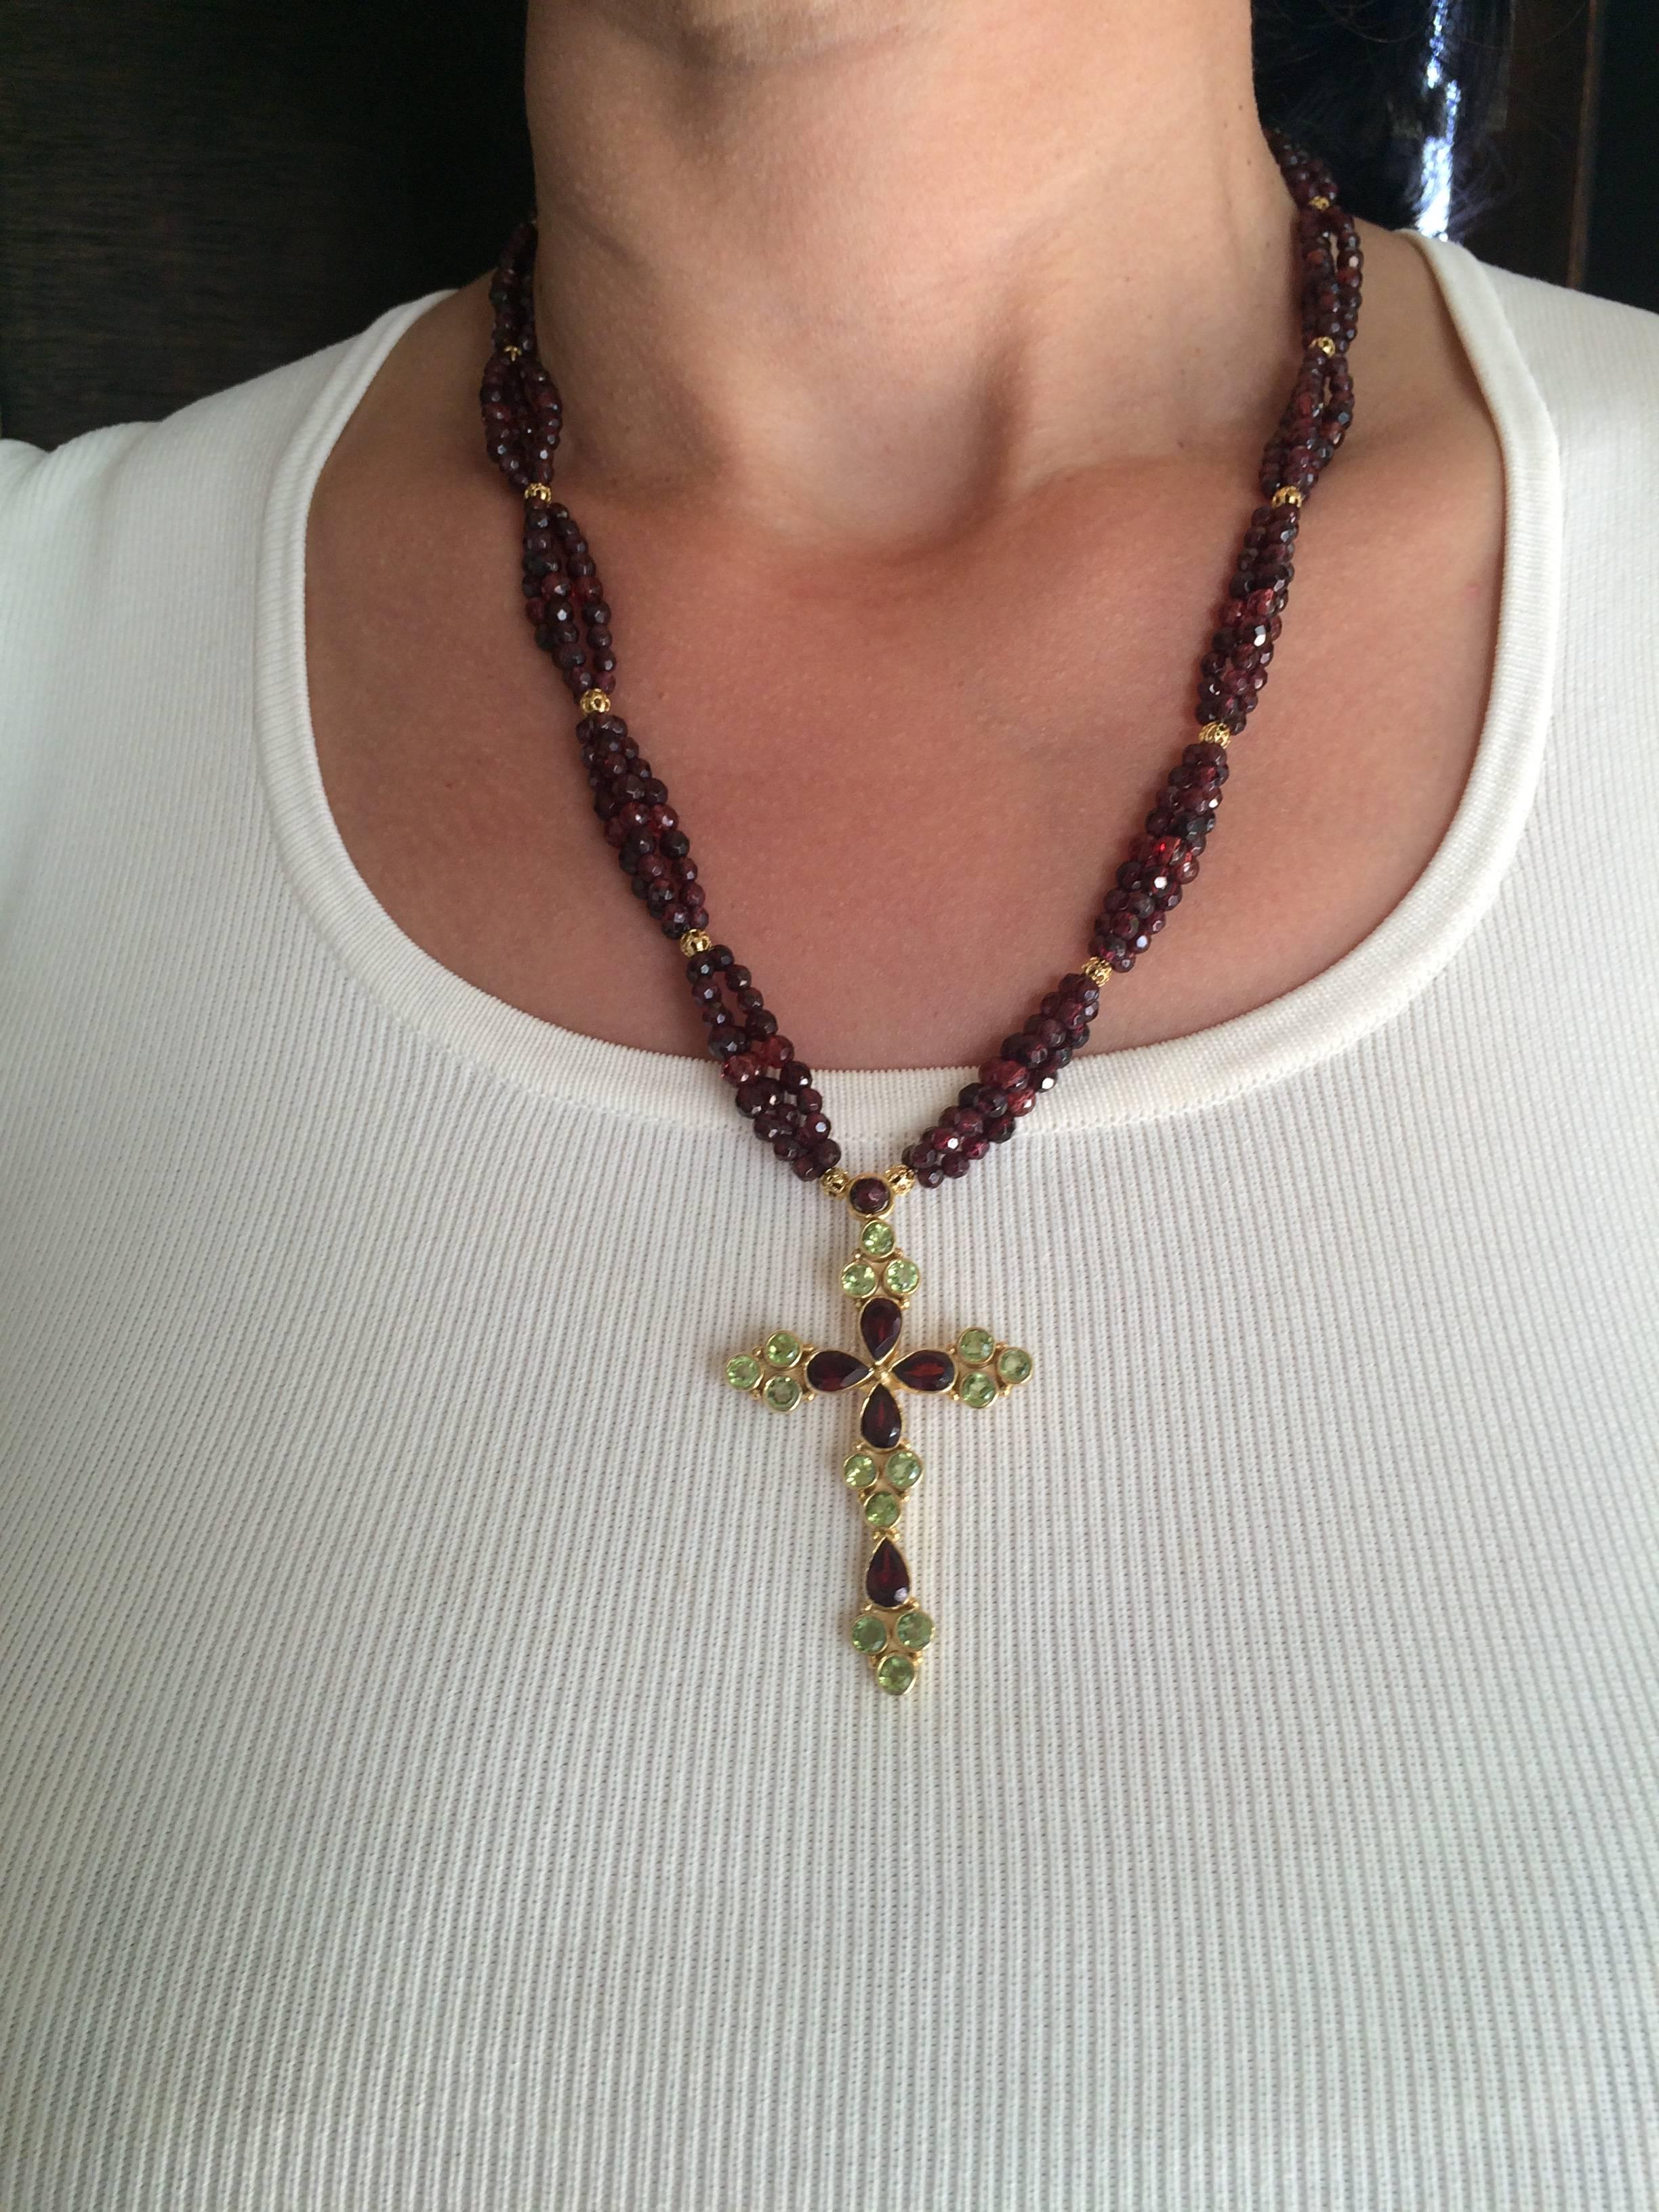 Faceted Garnet Bead Necklace with Peridot and Garnet Gold-Plated Silver Cross 4